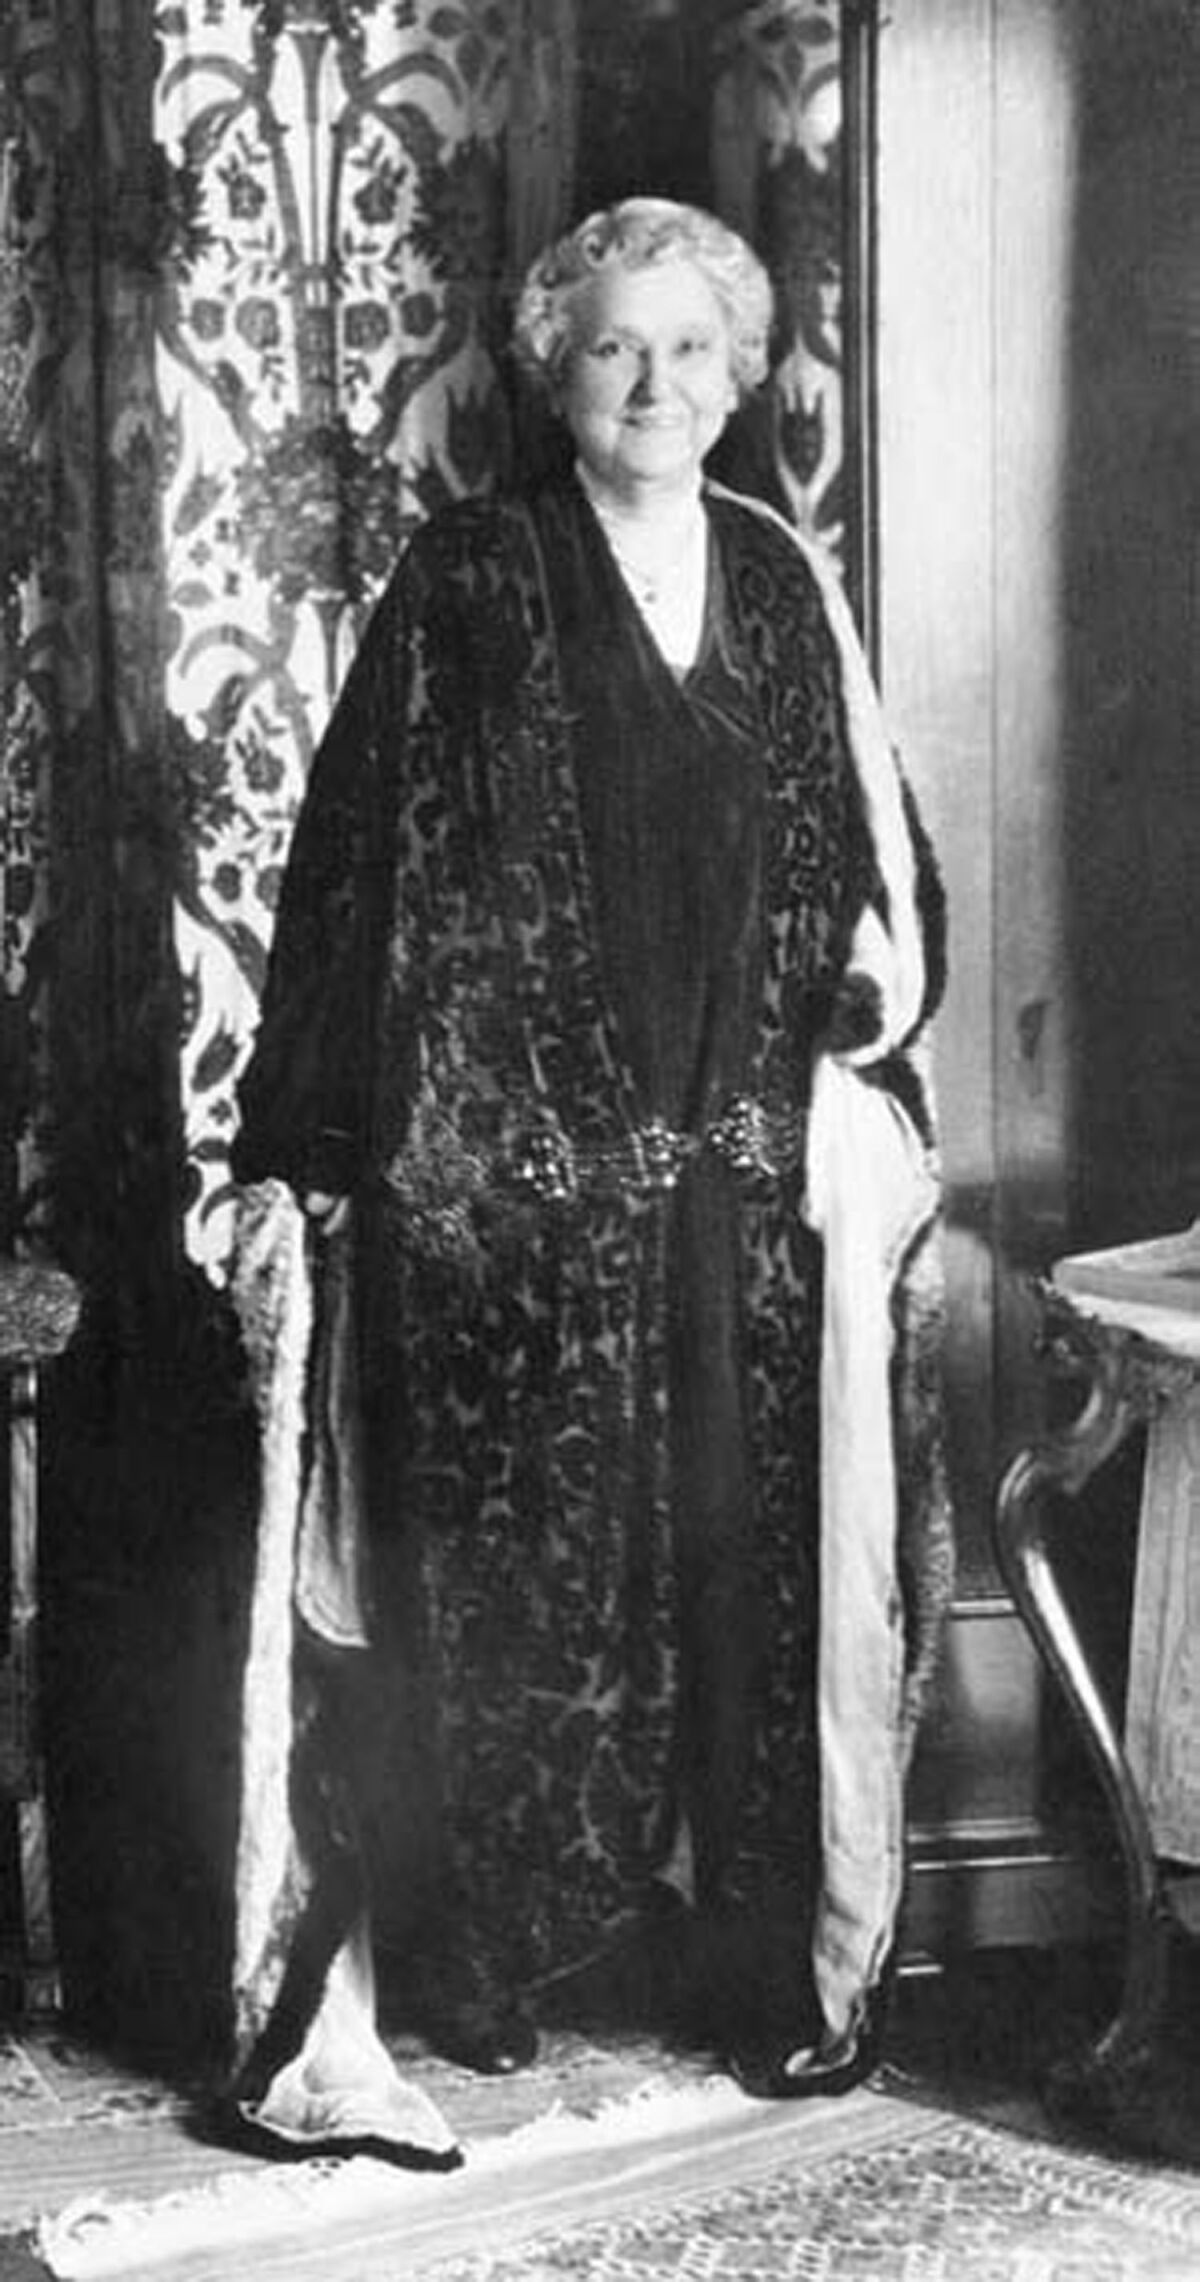 Katherine Tingley is pictured in the mid-1920s at Lomaland, the Theosophical community she founded in Point Loma.